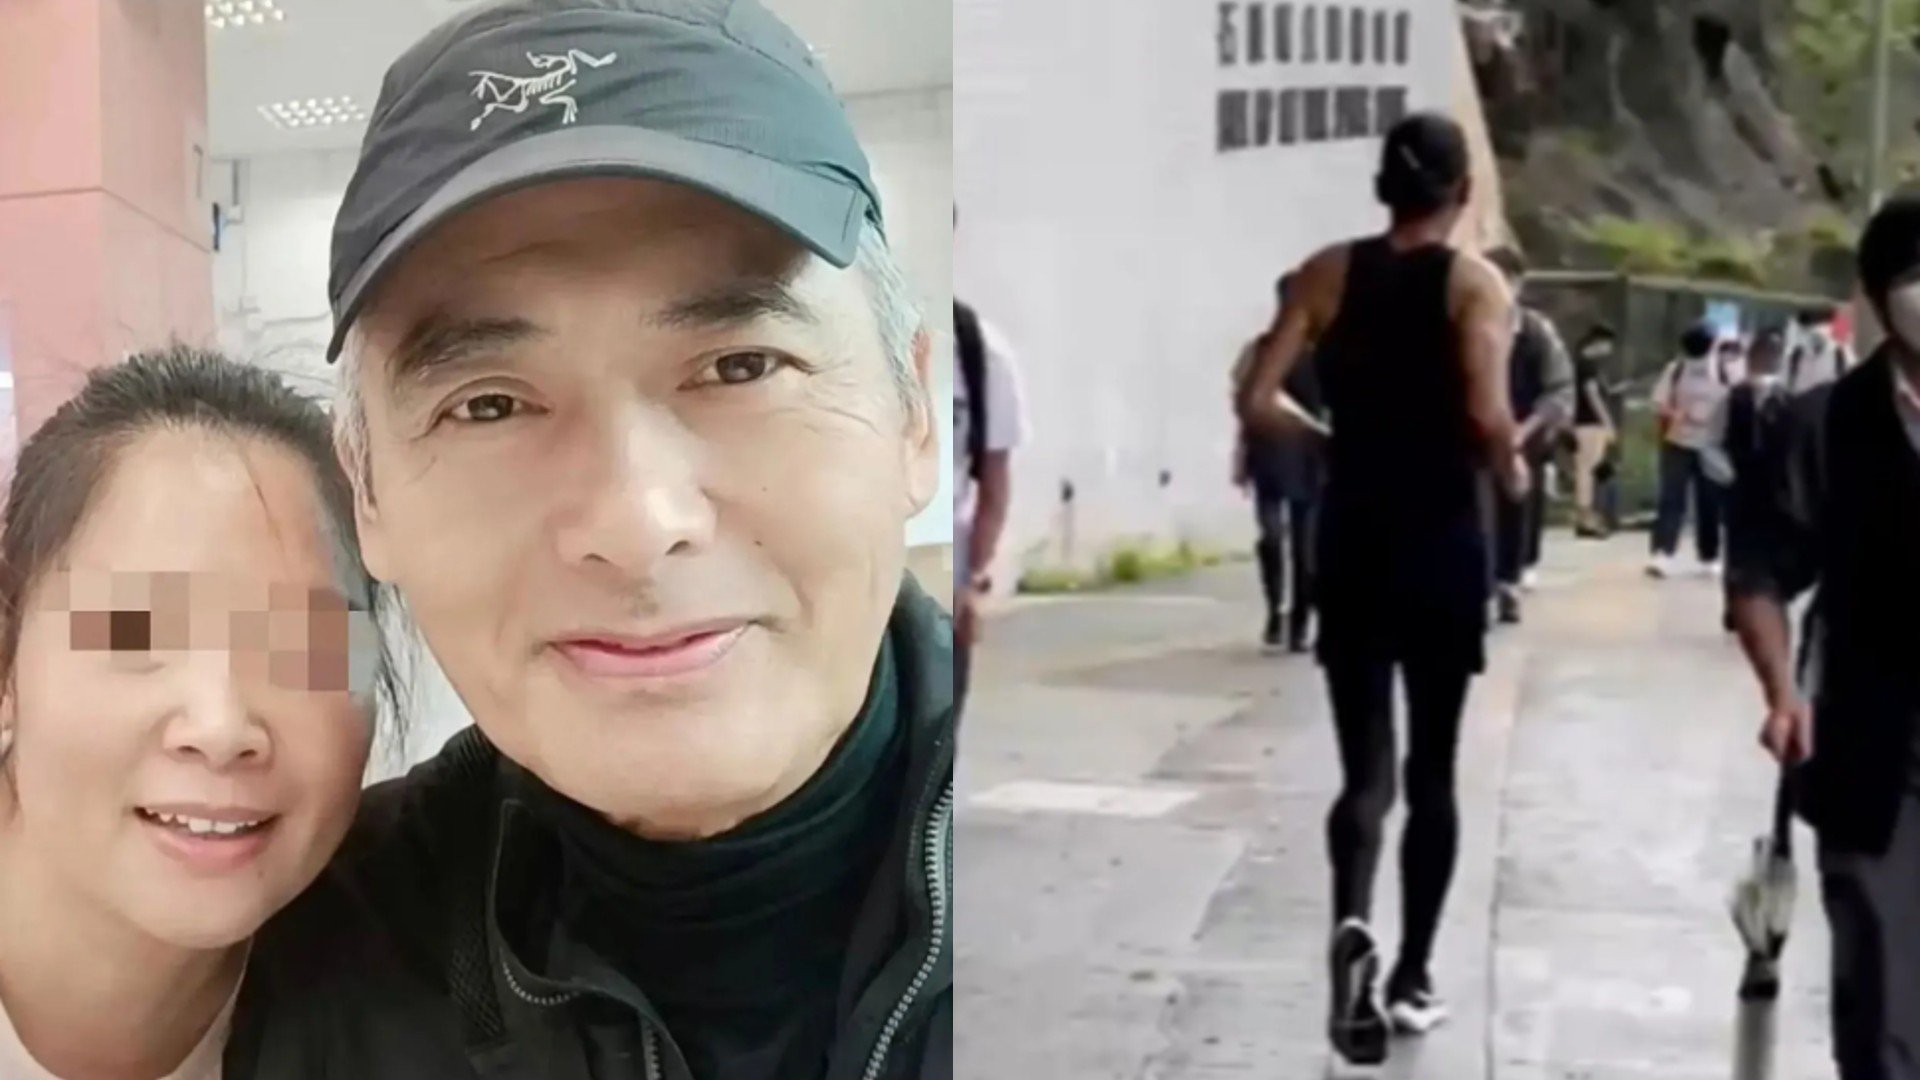 Netizen Snaps Pics Of Chow Yun Fat, 67, Looking Really Fit While Out  Jogging - 8days